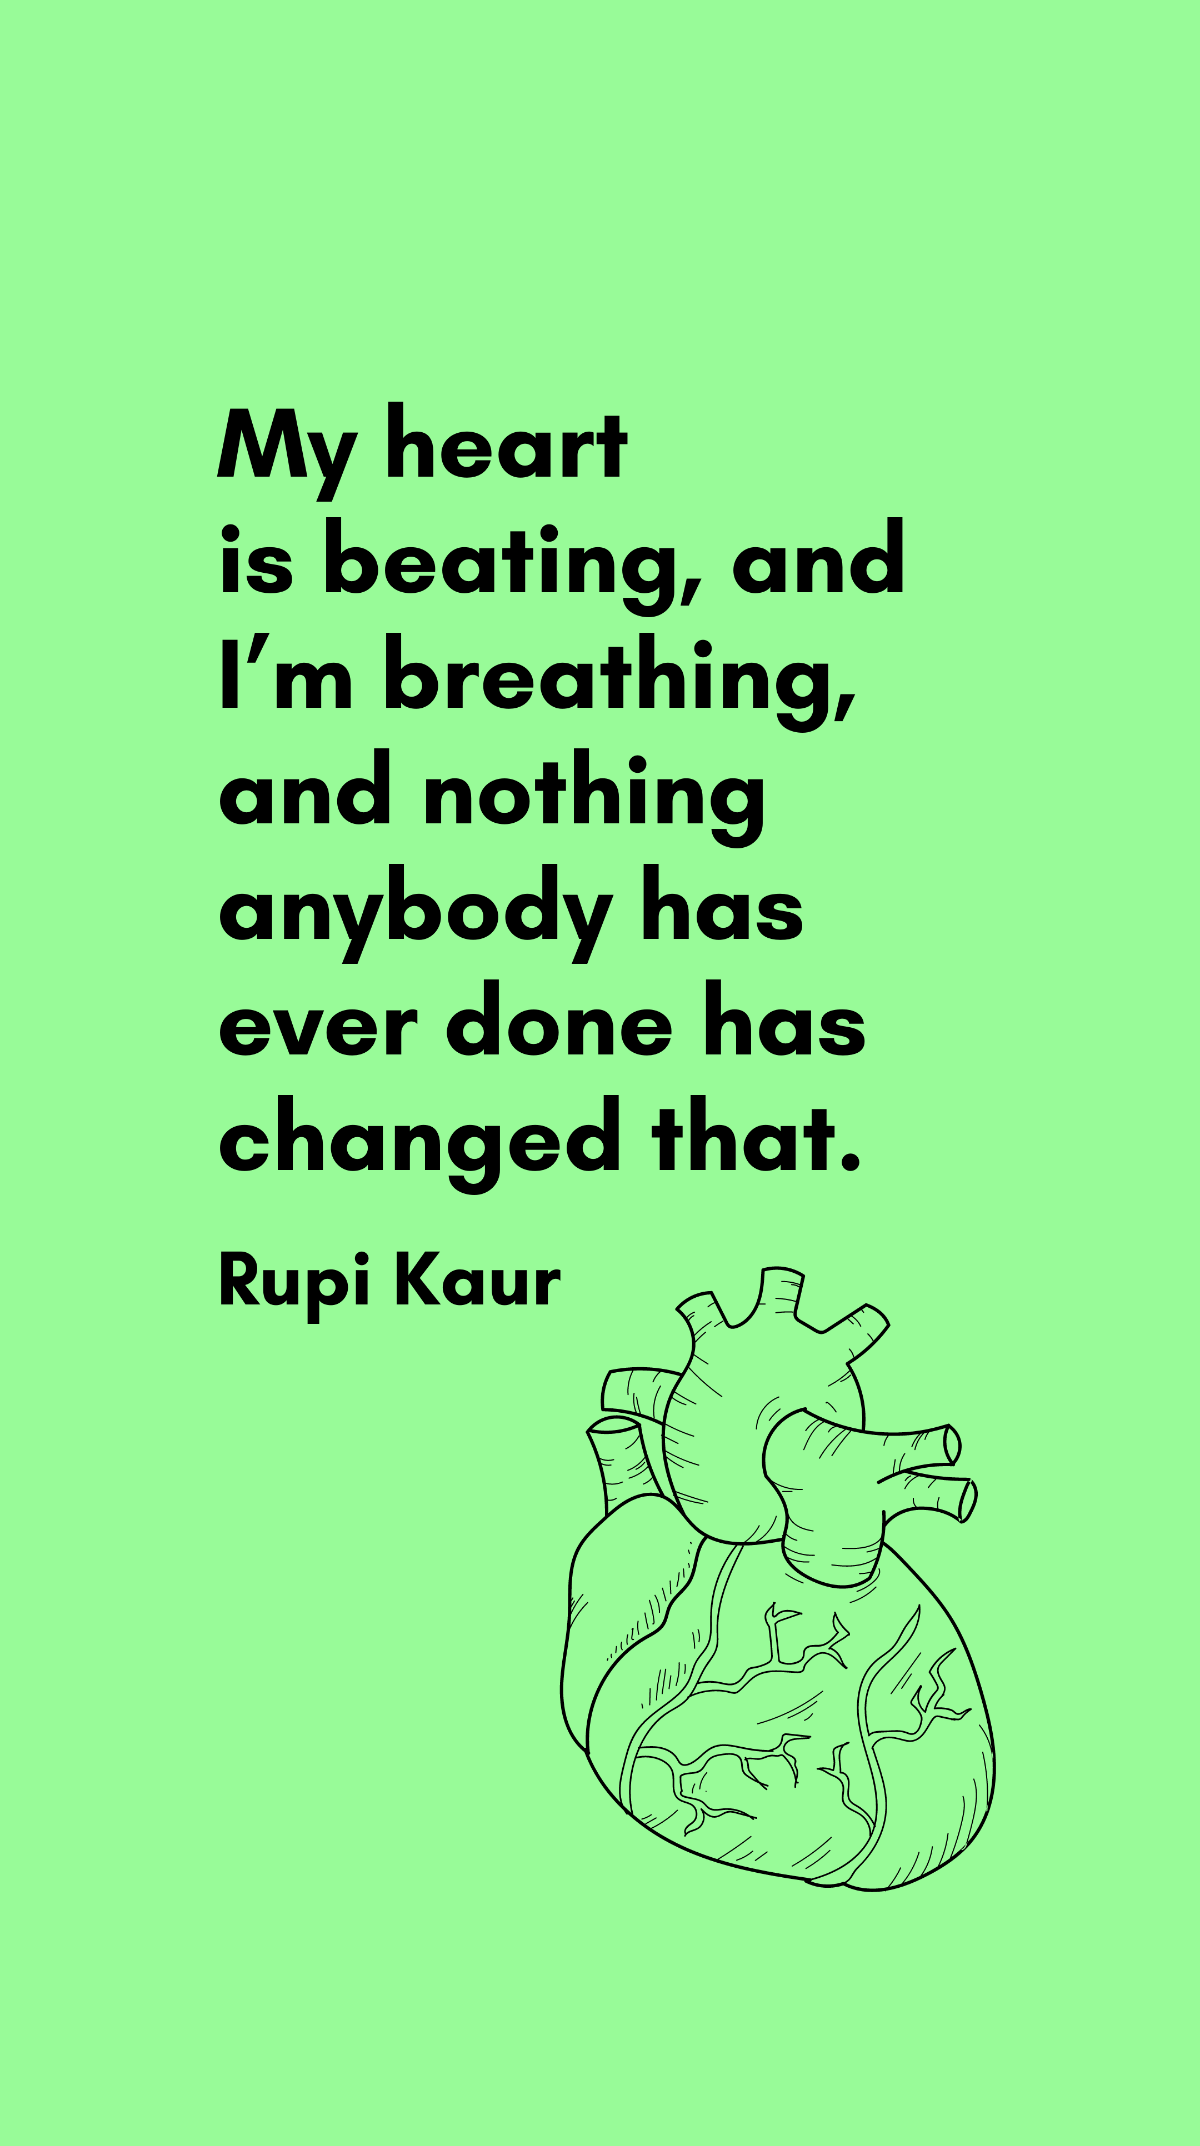 Rupi Kaur - My heart is beating, and I’m breathing, and nothing anybody has ever done has changed that. Template